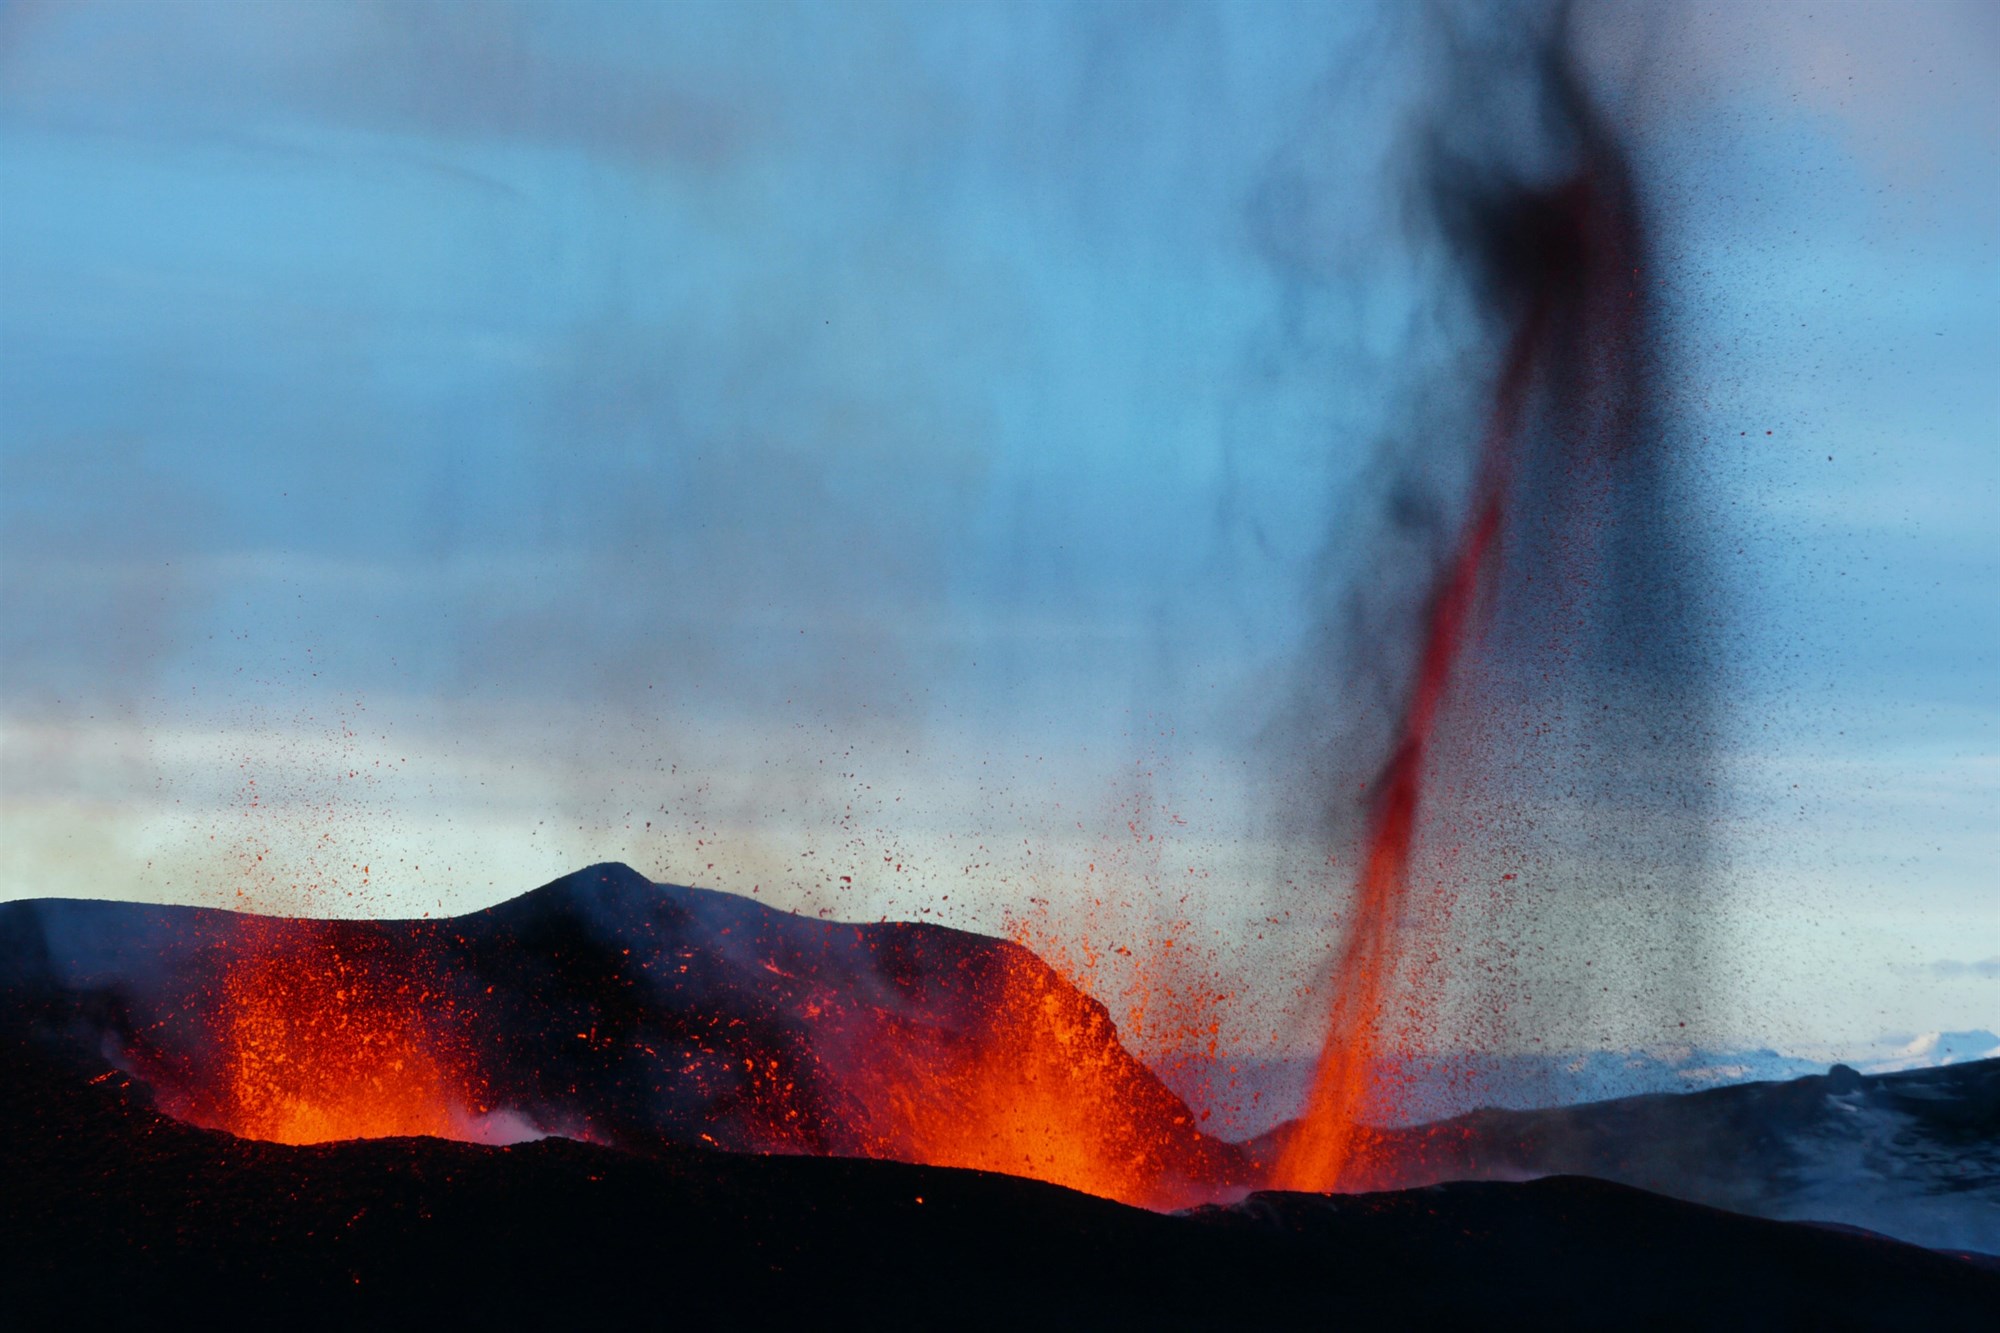 Lava flowing from eruption at Eyjafjallajökull in Iceland